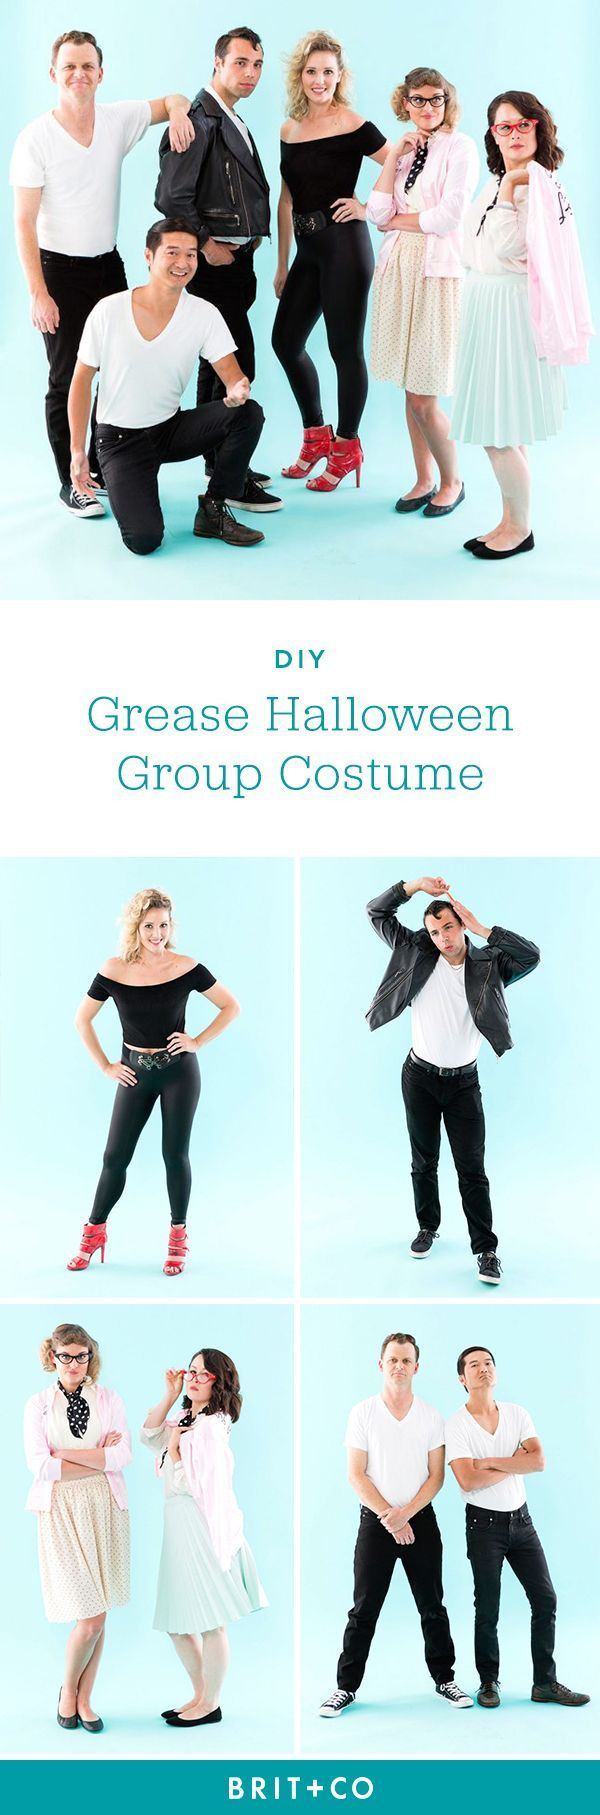 Grease Costume DIY
 Best 25 Pink lady costume ideas on Pinterest